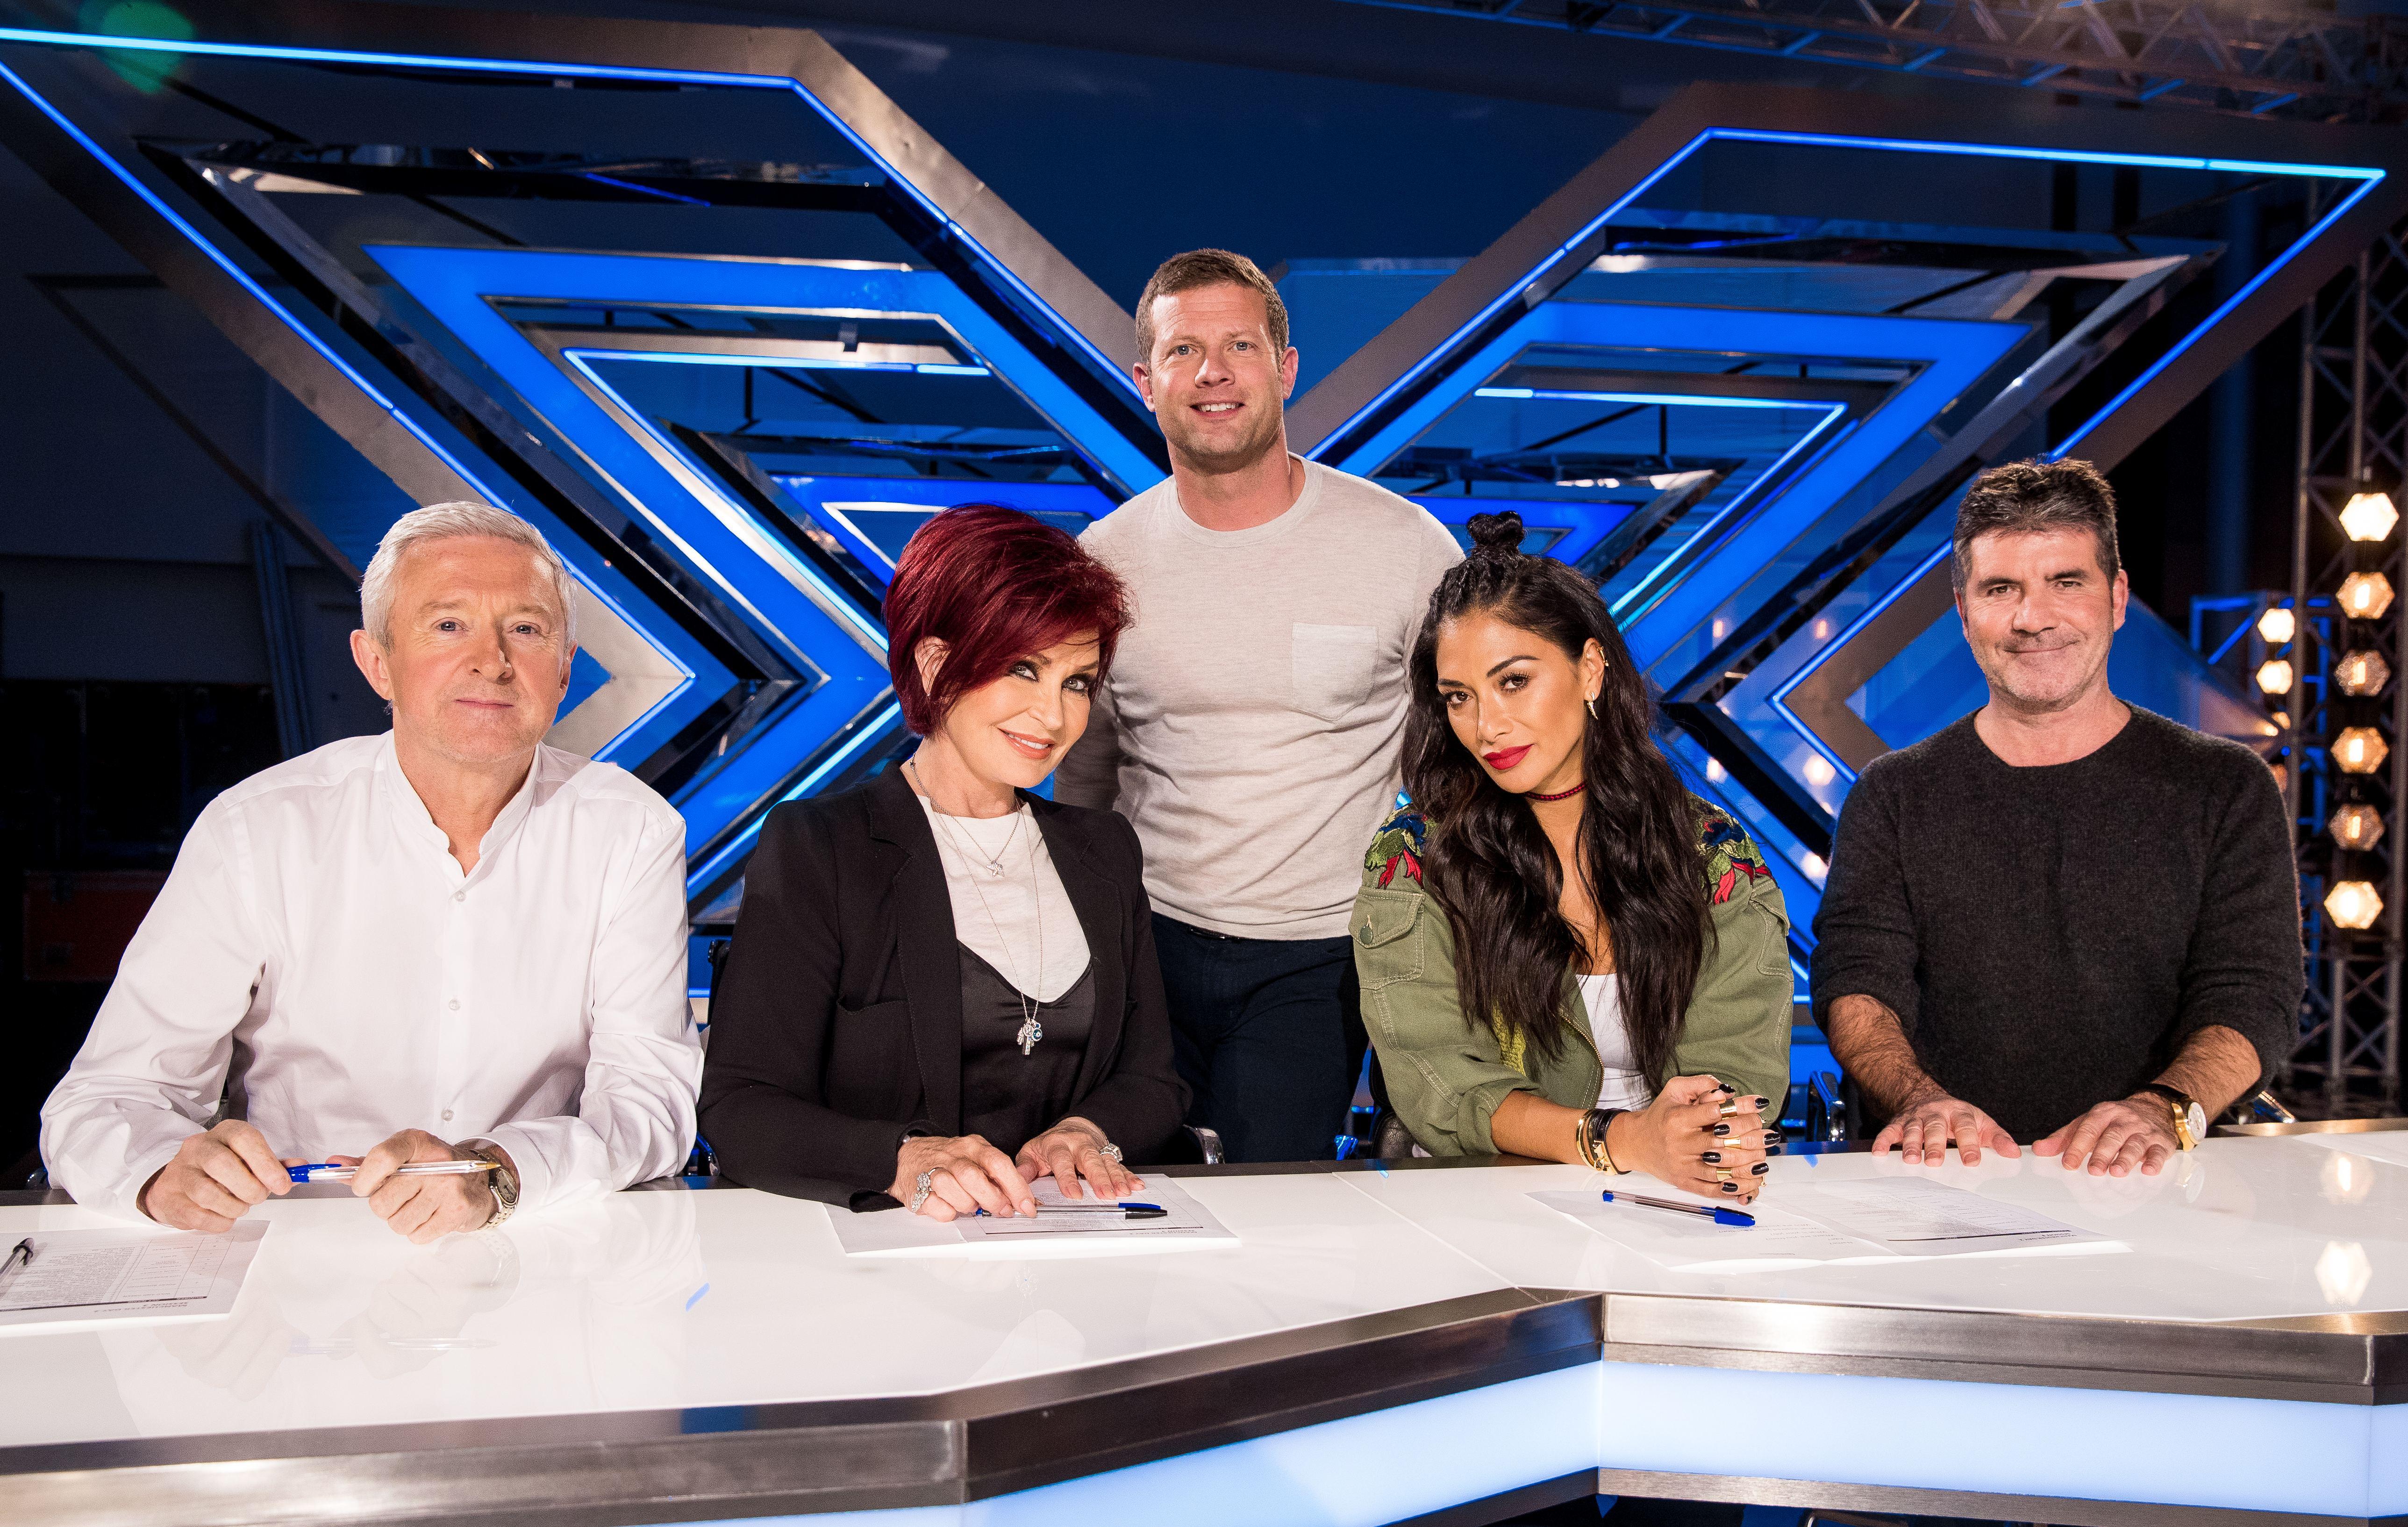  Sharon spent many years on The X Factor judging panel